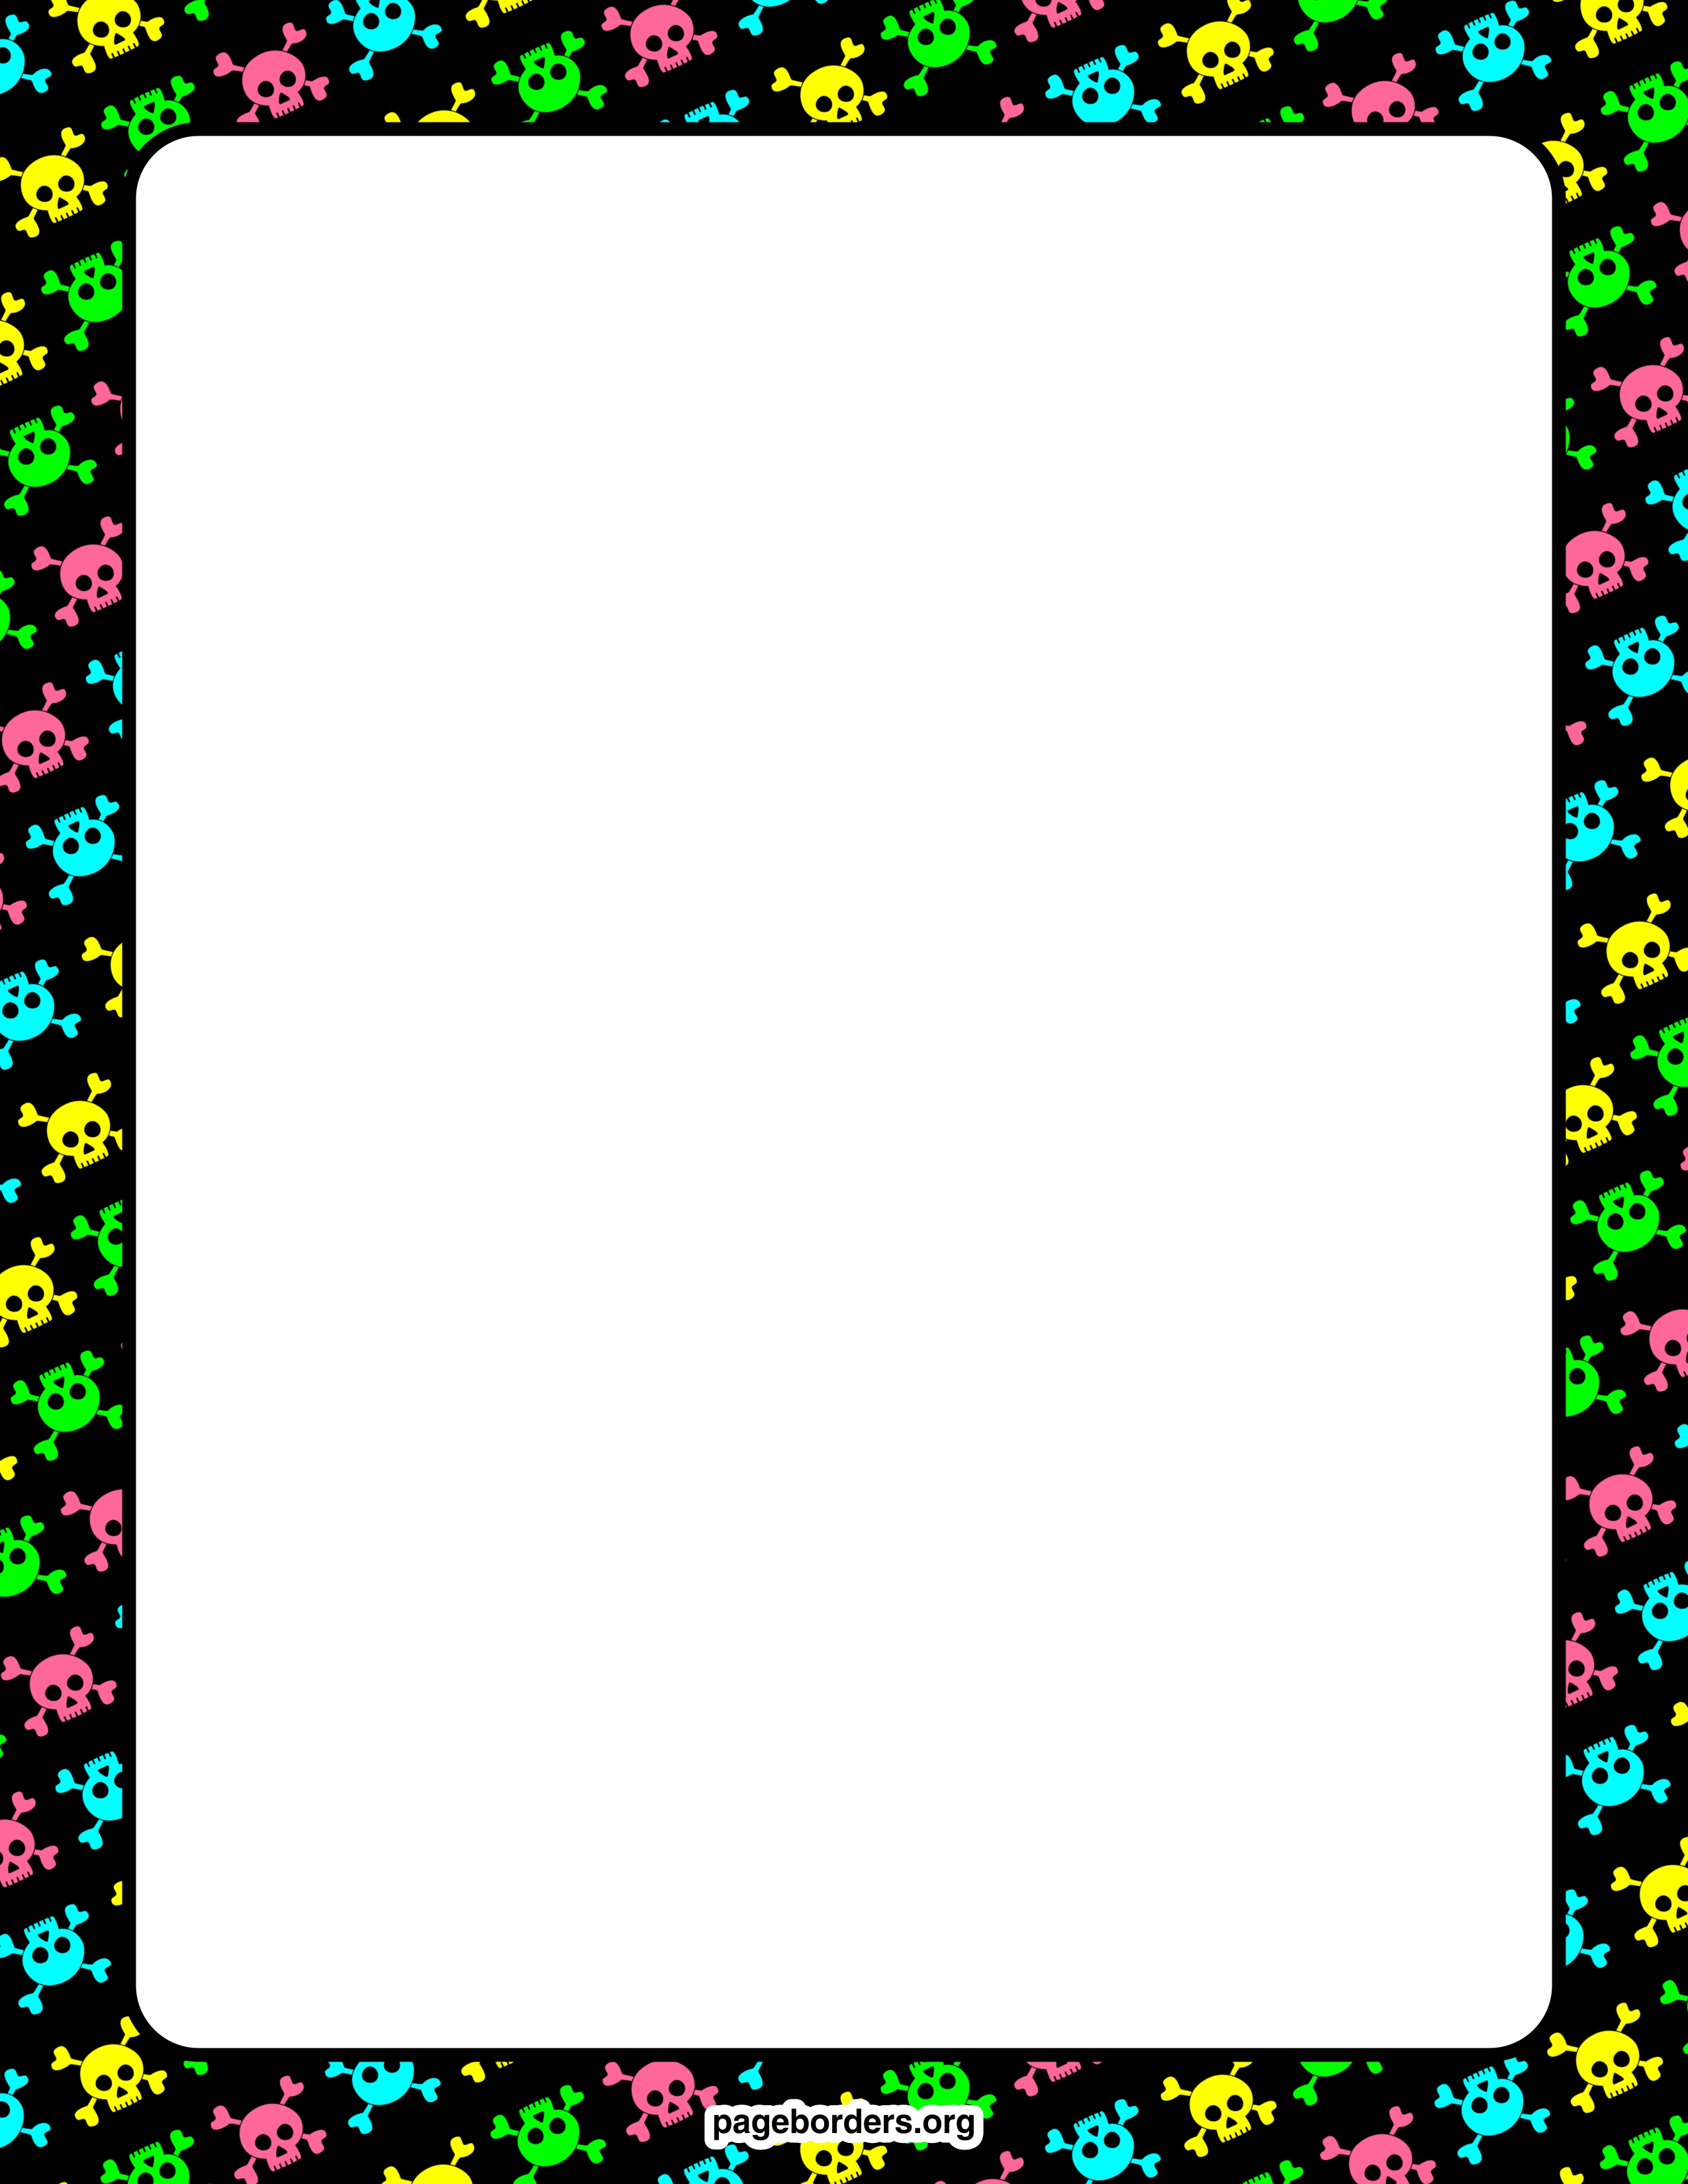 Halloween Border Paper   Clipart Panda   Free Clipart Images